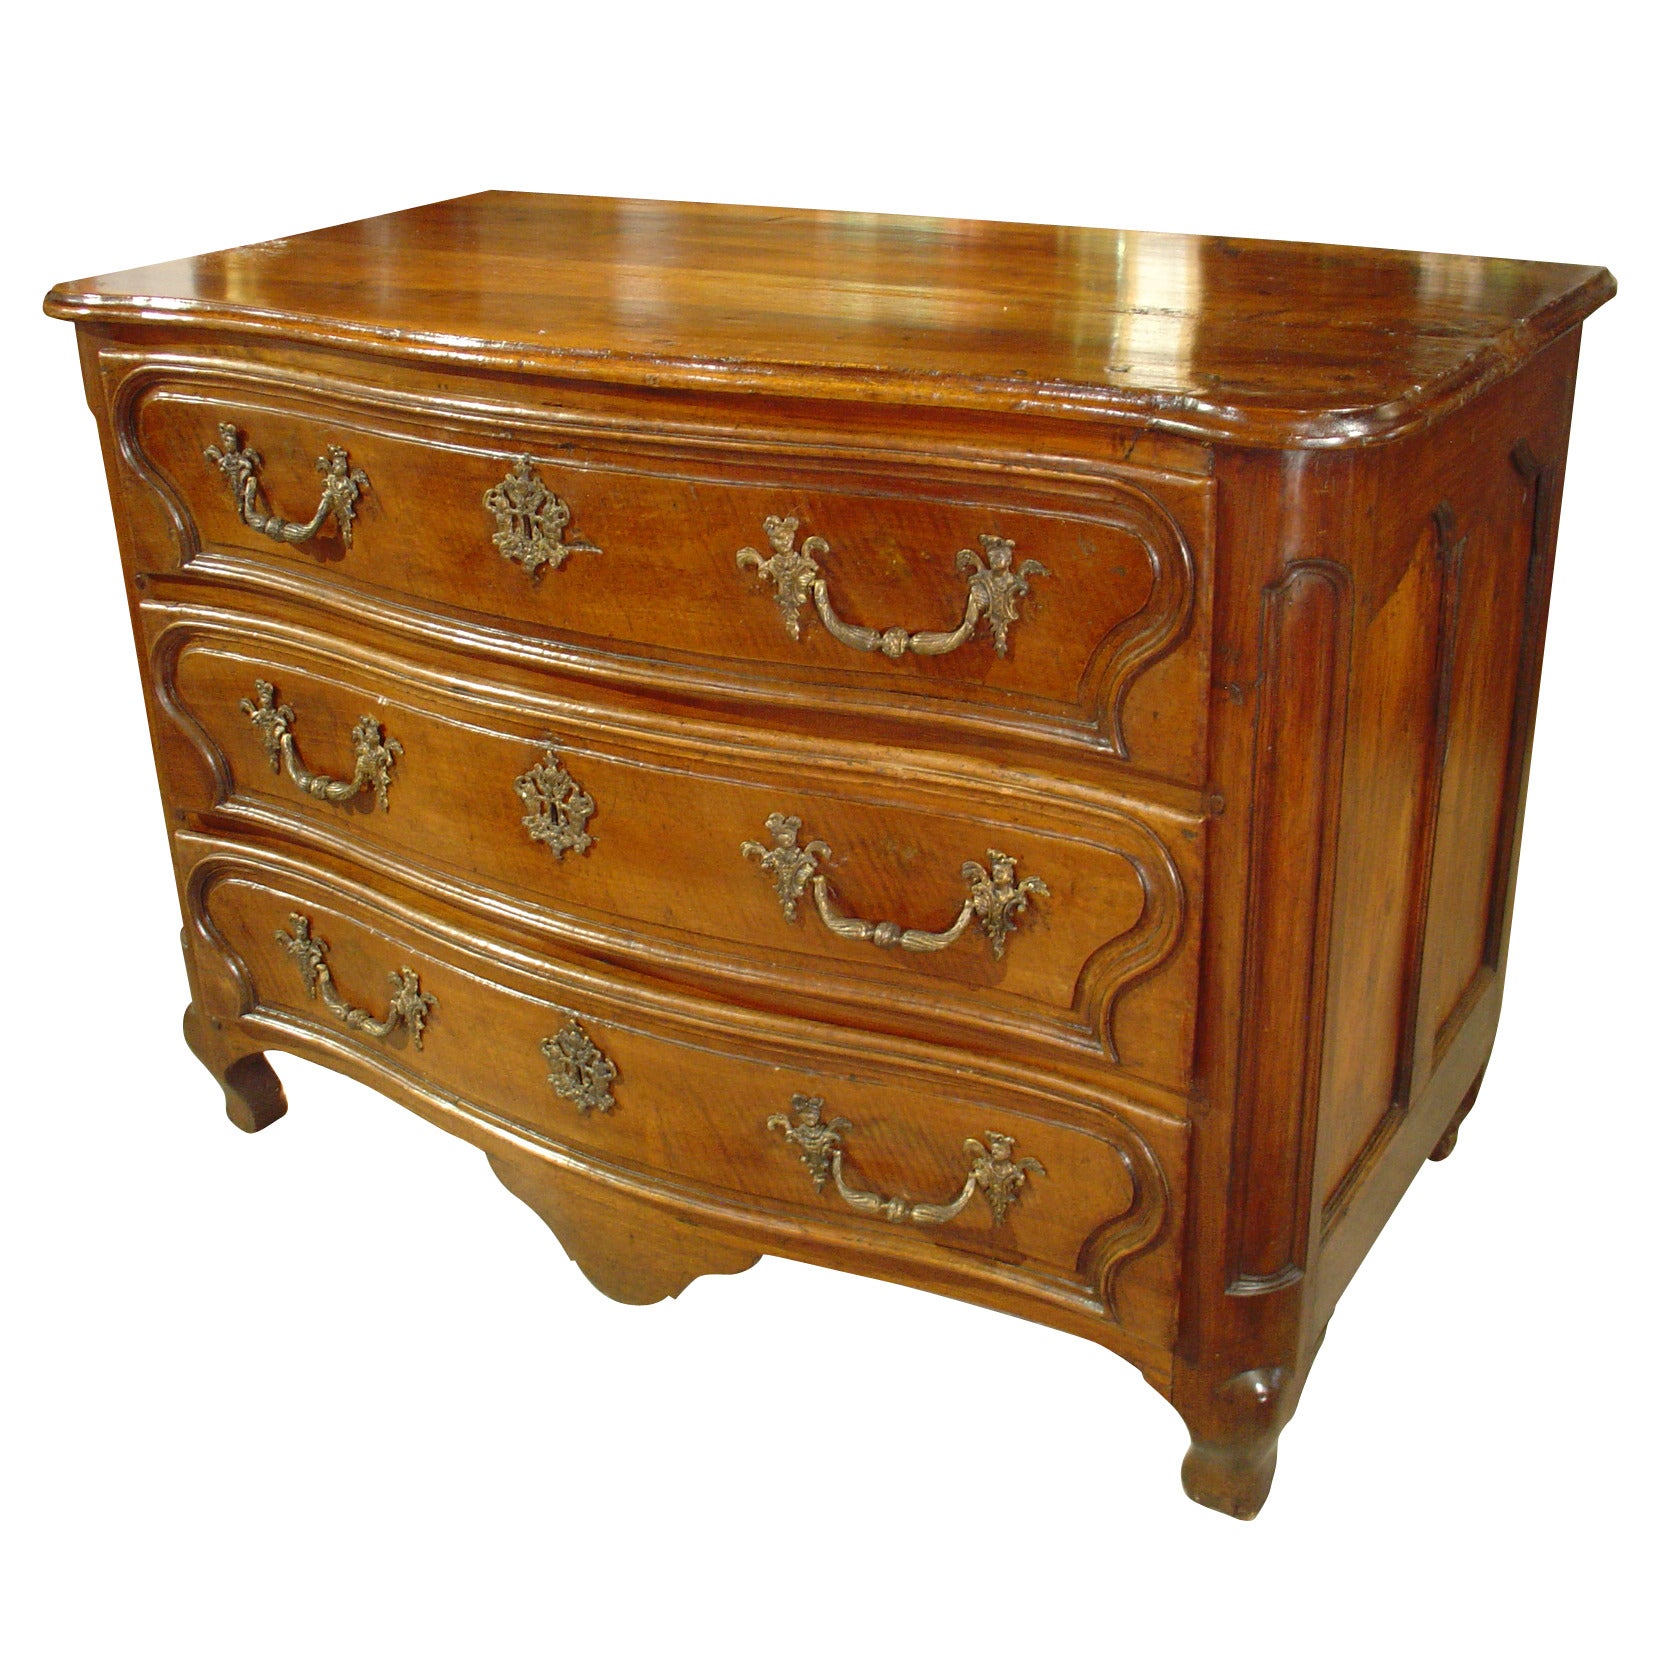 18th Century Walnut Wood Commode from France